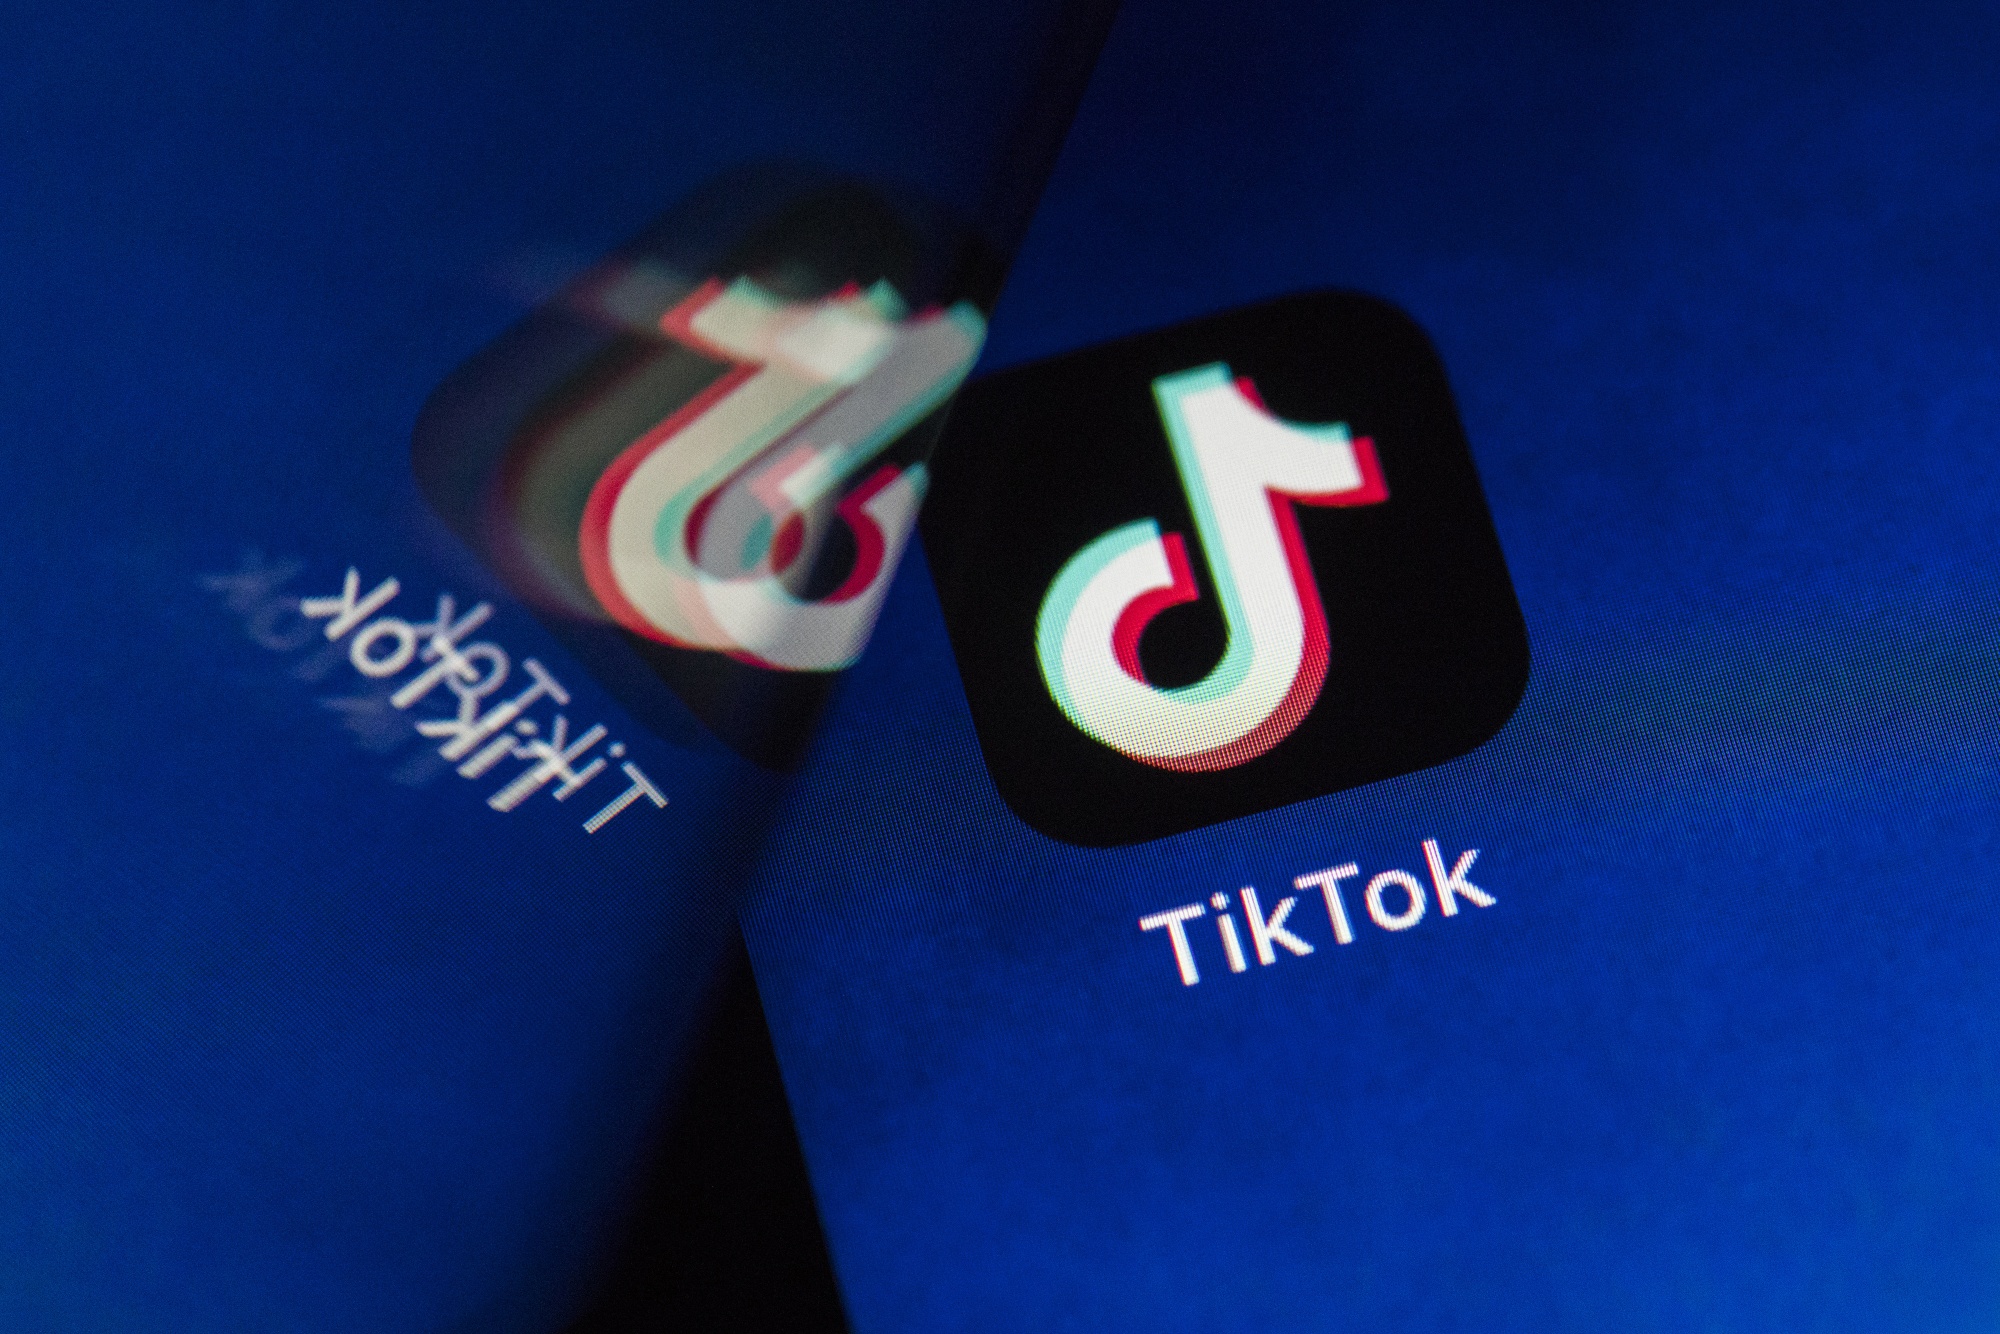 Subway Surfers Has Been Taking Over TikTok Feeds Lately